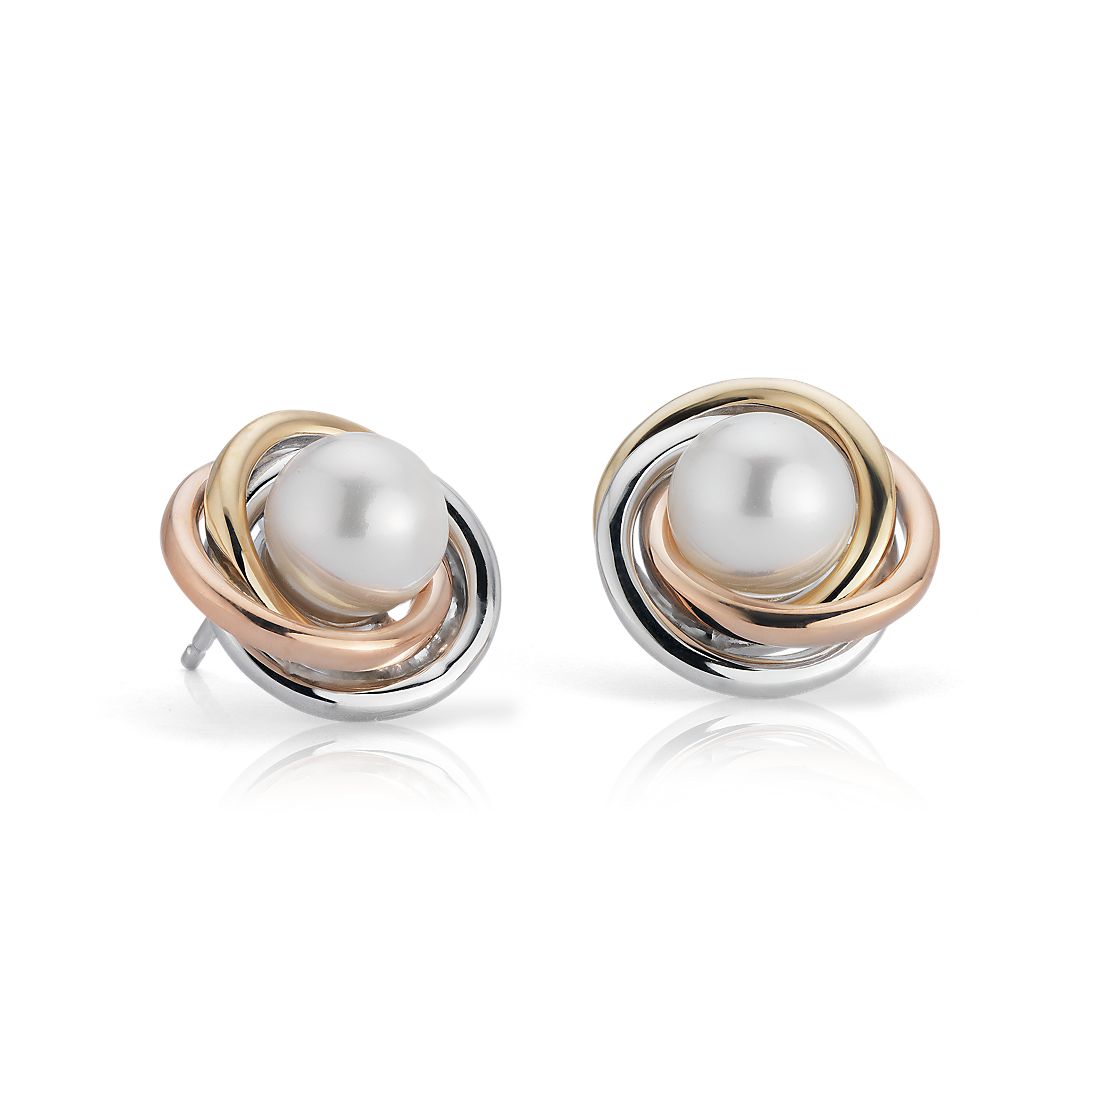 Tri-Colour Love Knot Earrings with Freshwater Cultured Pearls in 14k White, Yellow and Rose Gold (6-7mm)